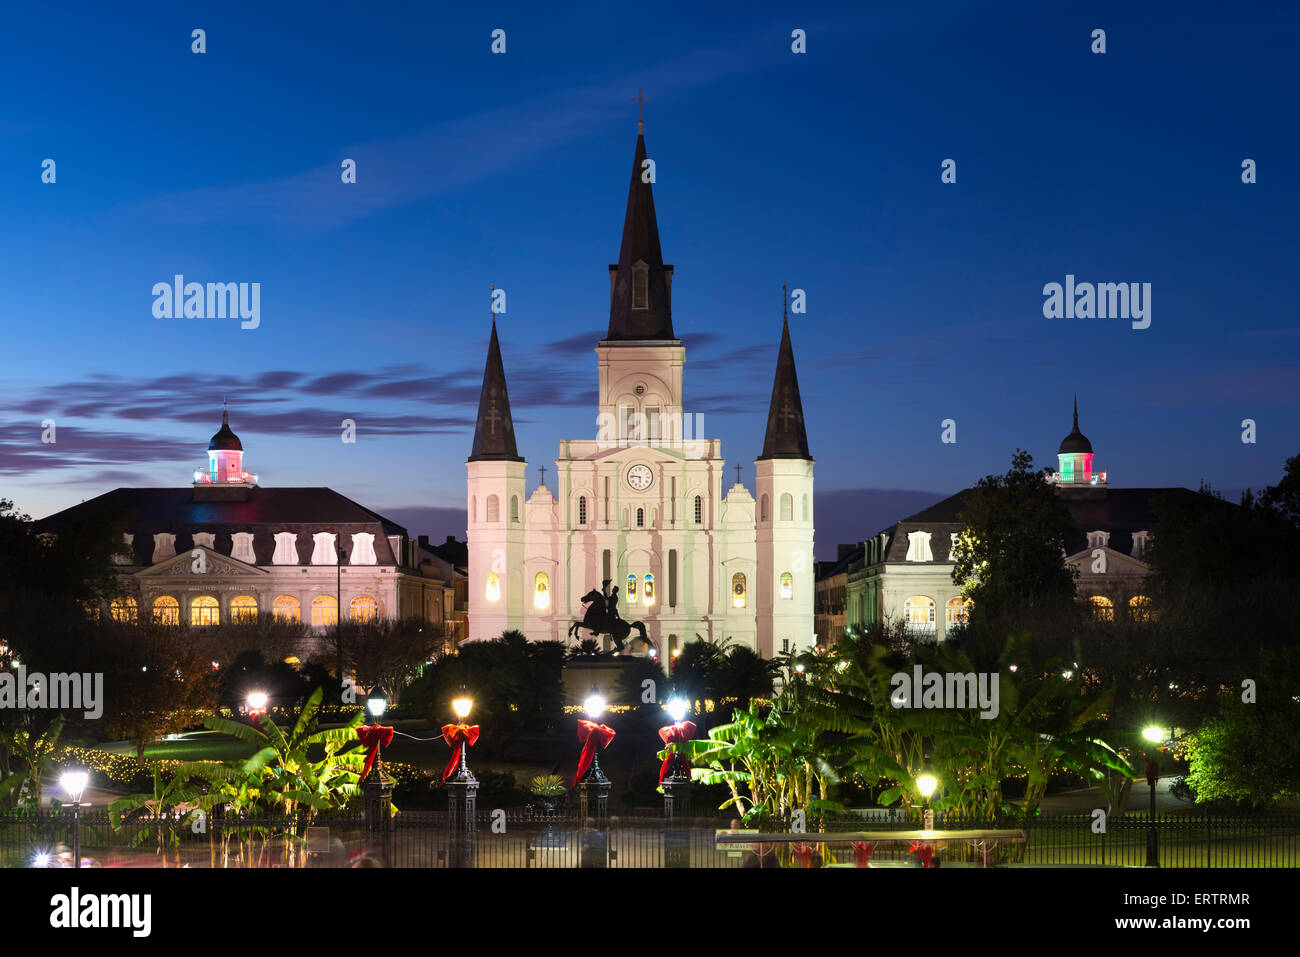 St Louis Cathedral, Jackson Square, New Orleans French Quarter, Louisiana, USA at night Stock Photo